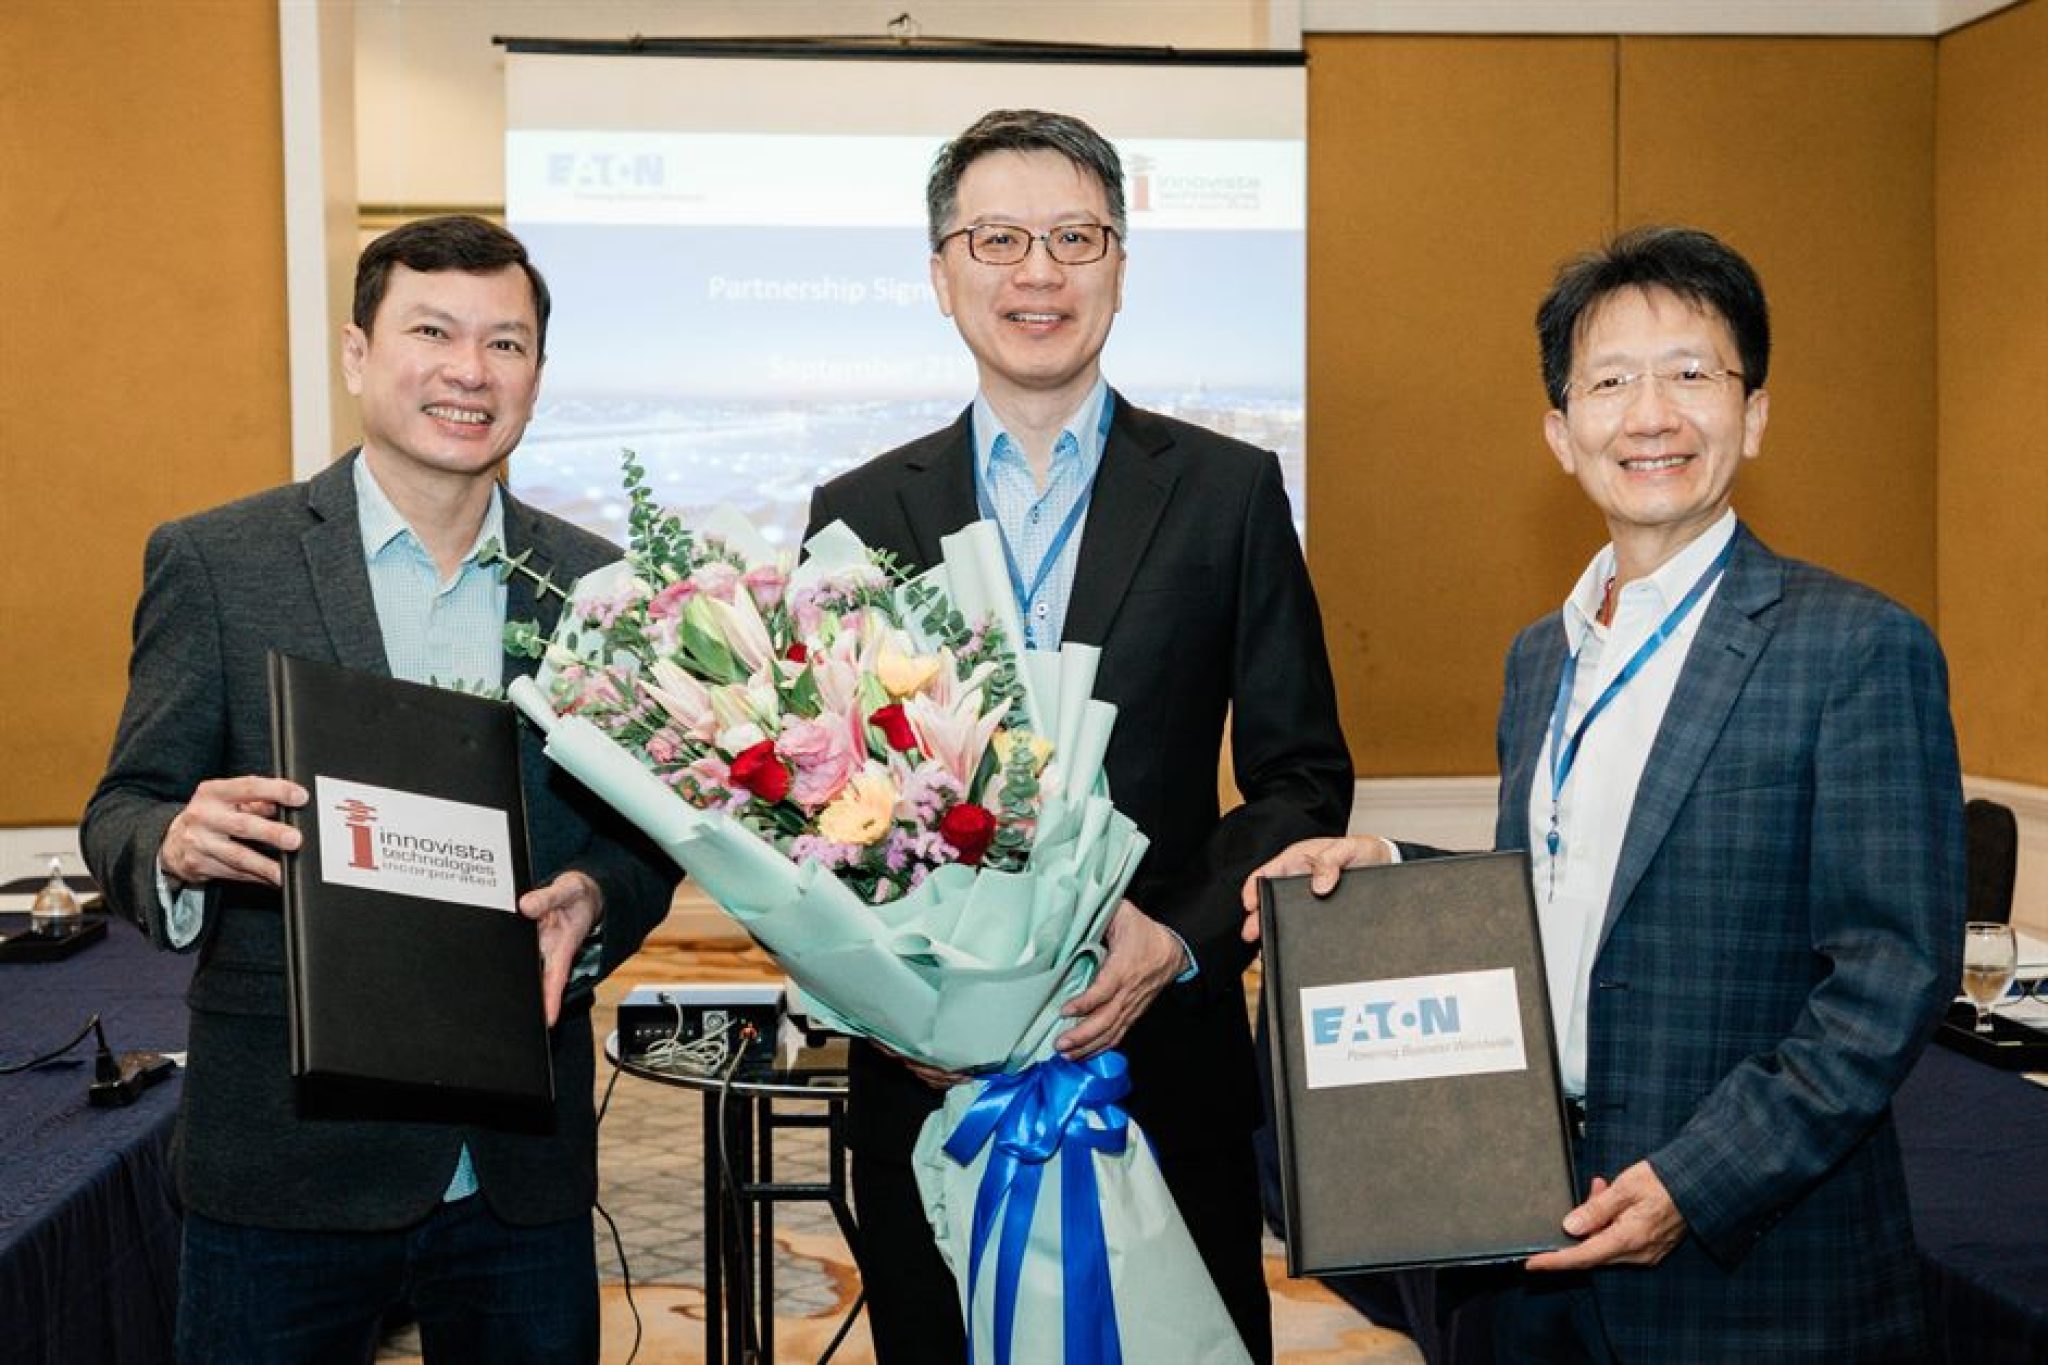  Three men in suits are posing for a photo. The man in the middle is holding a bouquet of flowers. The man on the left is holding a folder that says "Inovista". The man on the right is holding a folder that says "Eaton". The image is about Eaton 5A Advantage Series UPS in Indonesia.